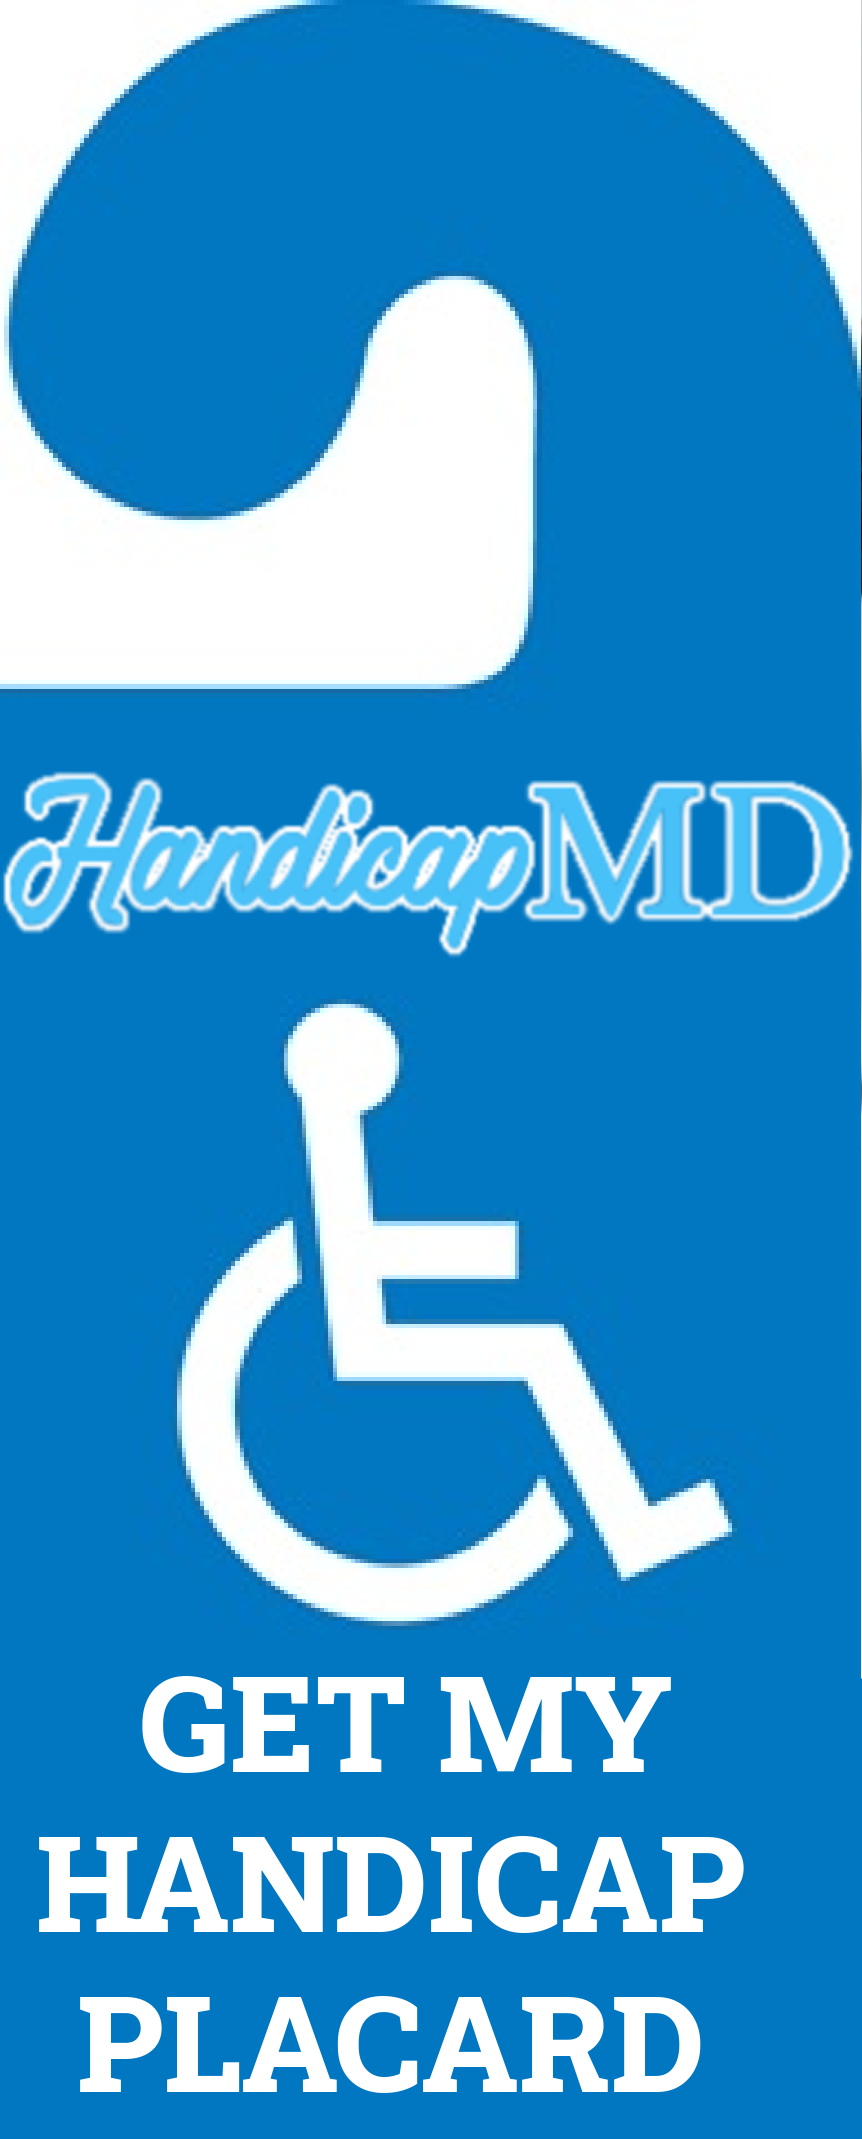 Handicap Placard Violations and Penalties in Oklahoma: What You Need to Know